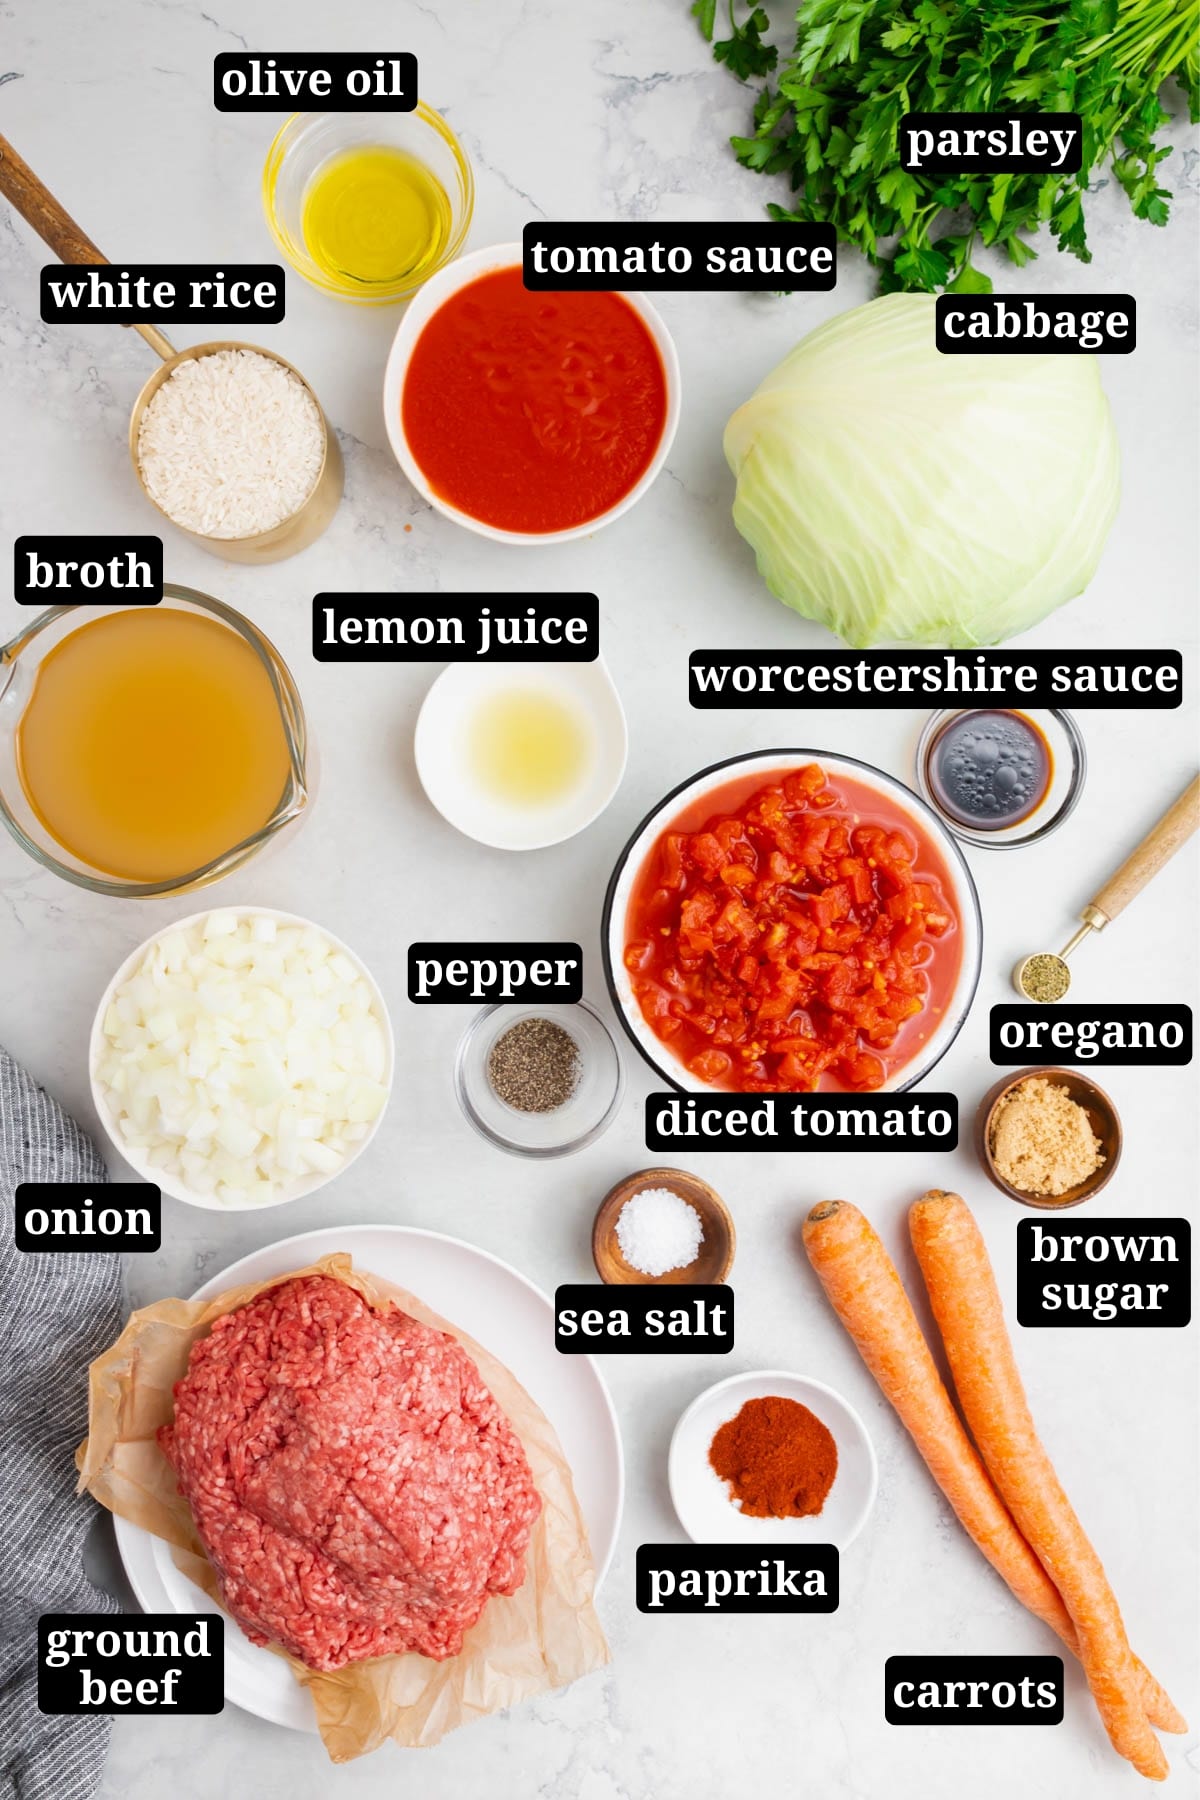 Ingredients in small bowls to make cabbage roll soup, including oil, tomato paste, rice, cabbage, chicken broth, worcestershire sauce, lemon juice, oregano, brown sugar, paprika, salt, pepper, onions, carrots and ground beef with text overlays over each ingredient.